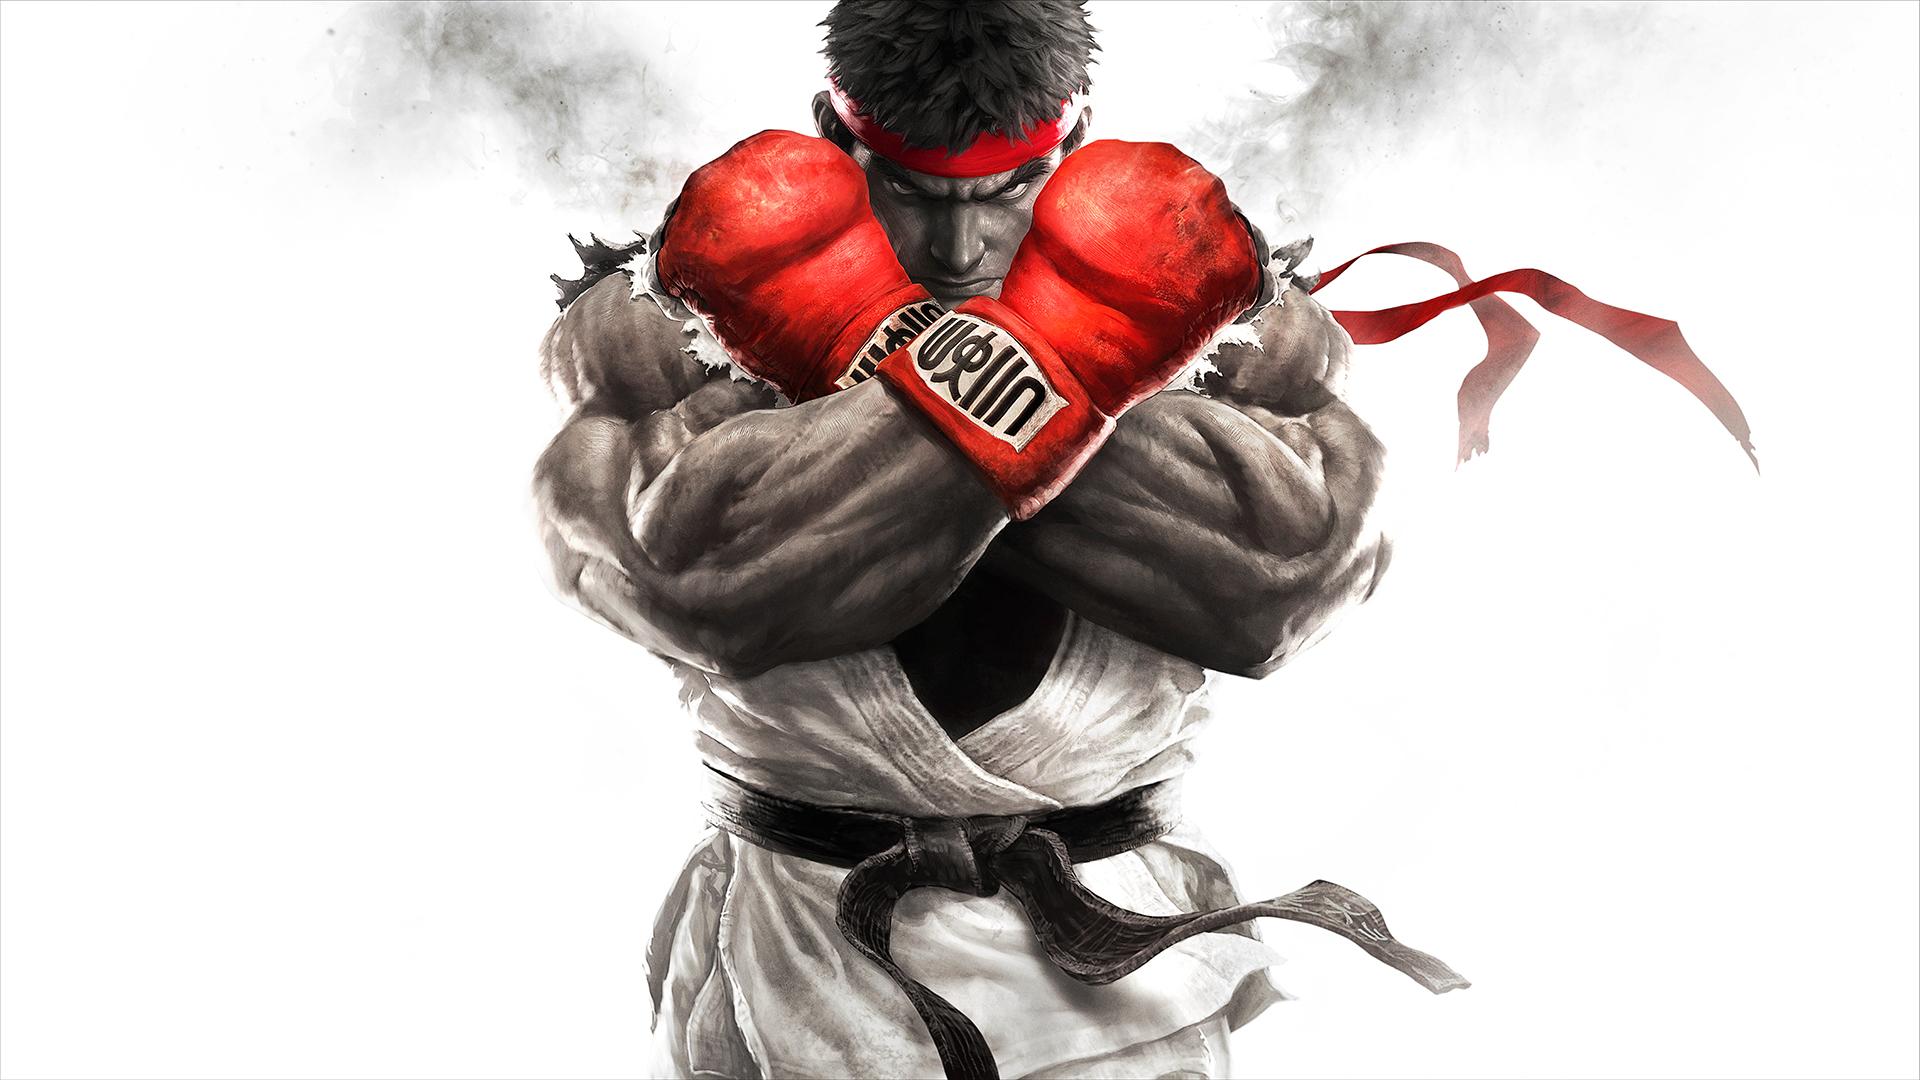 Street Fighter V: Arcade Edition teased in new trailer